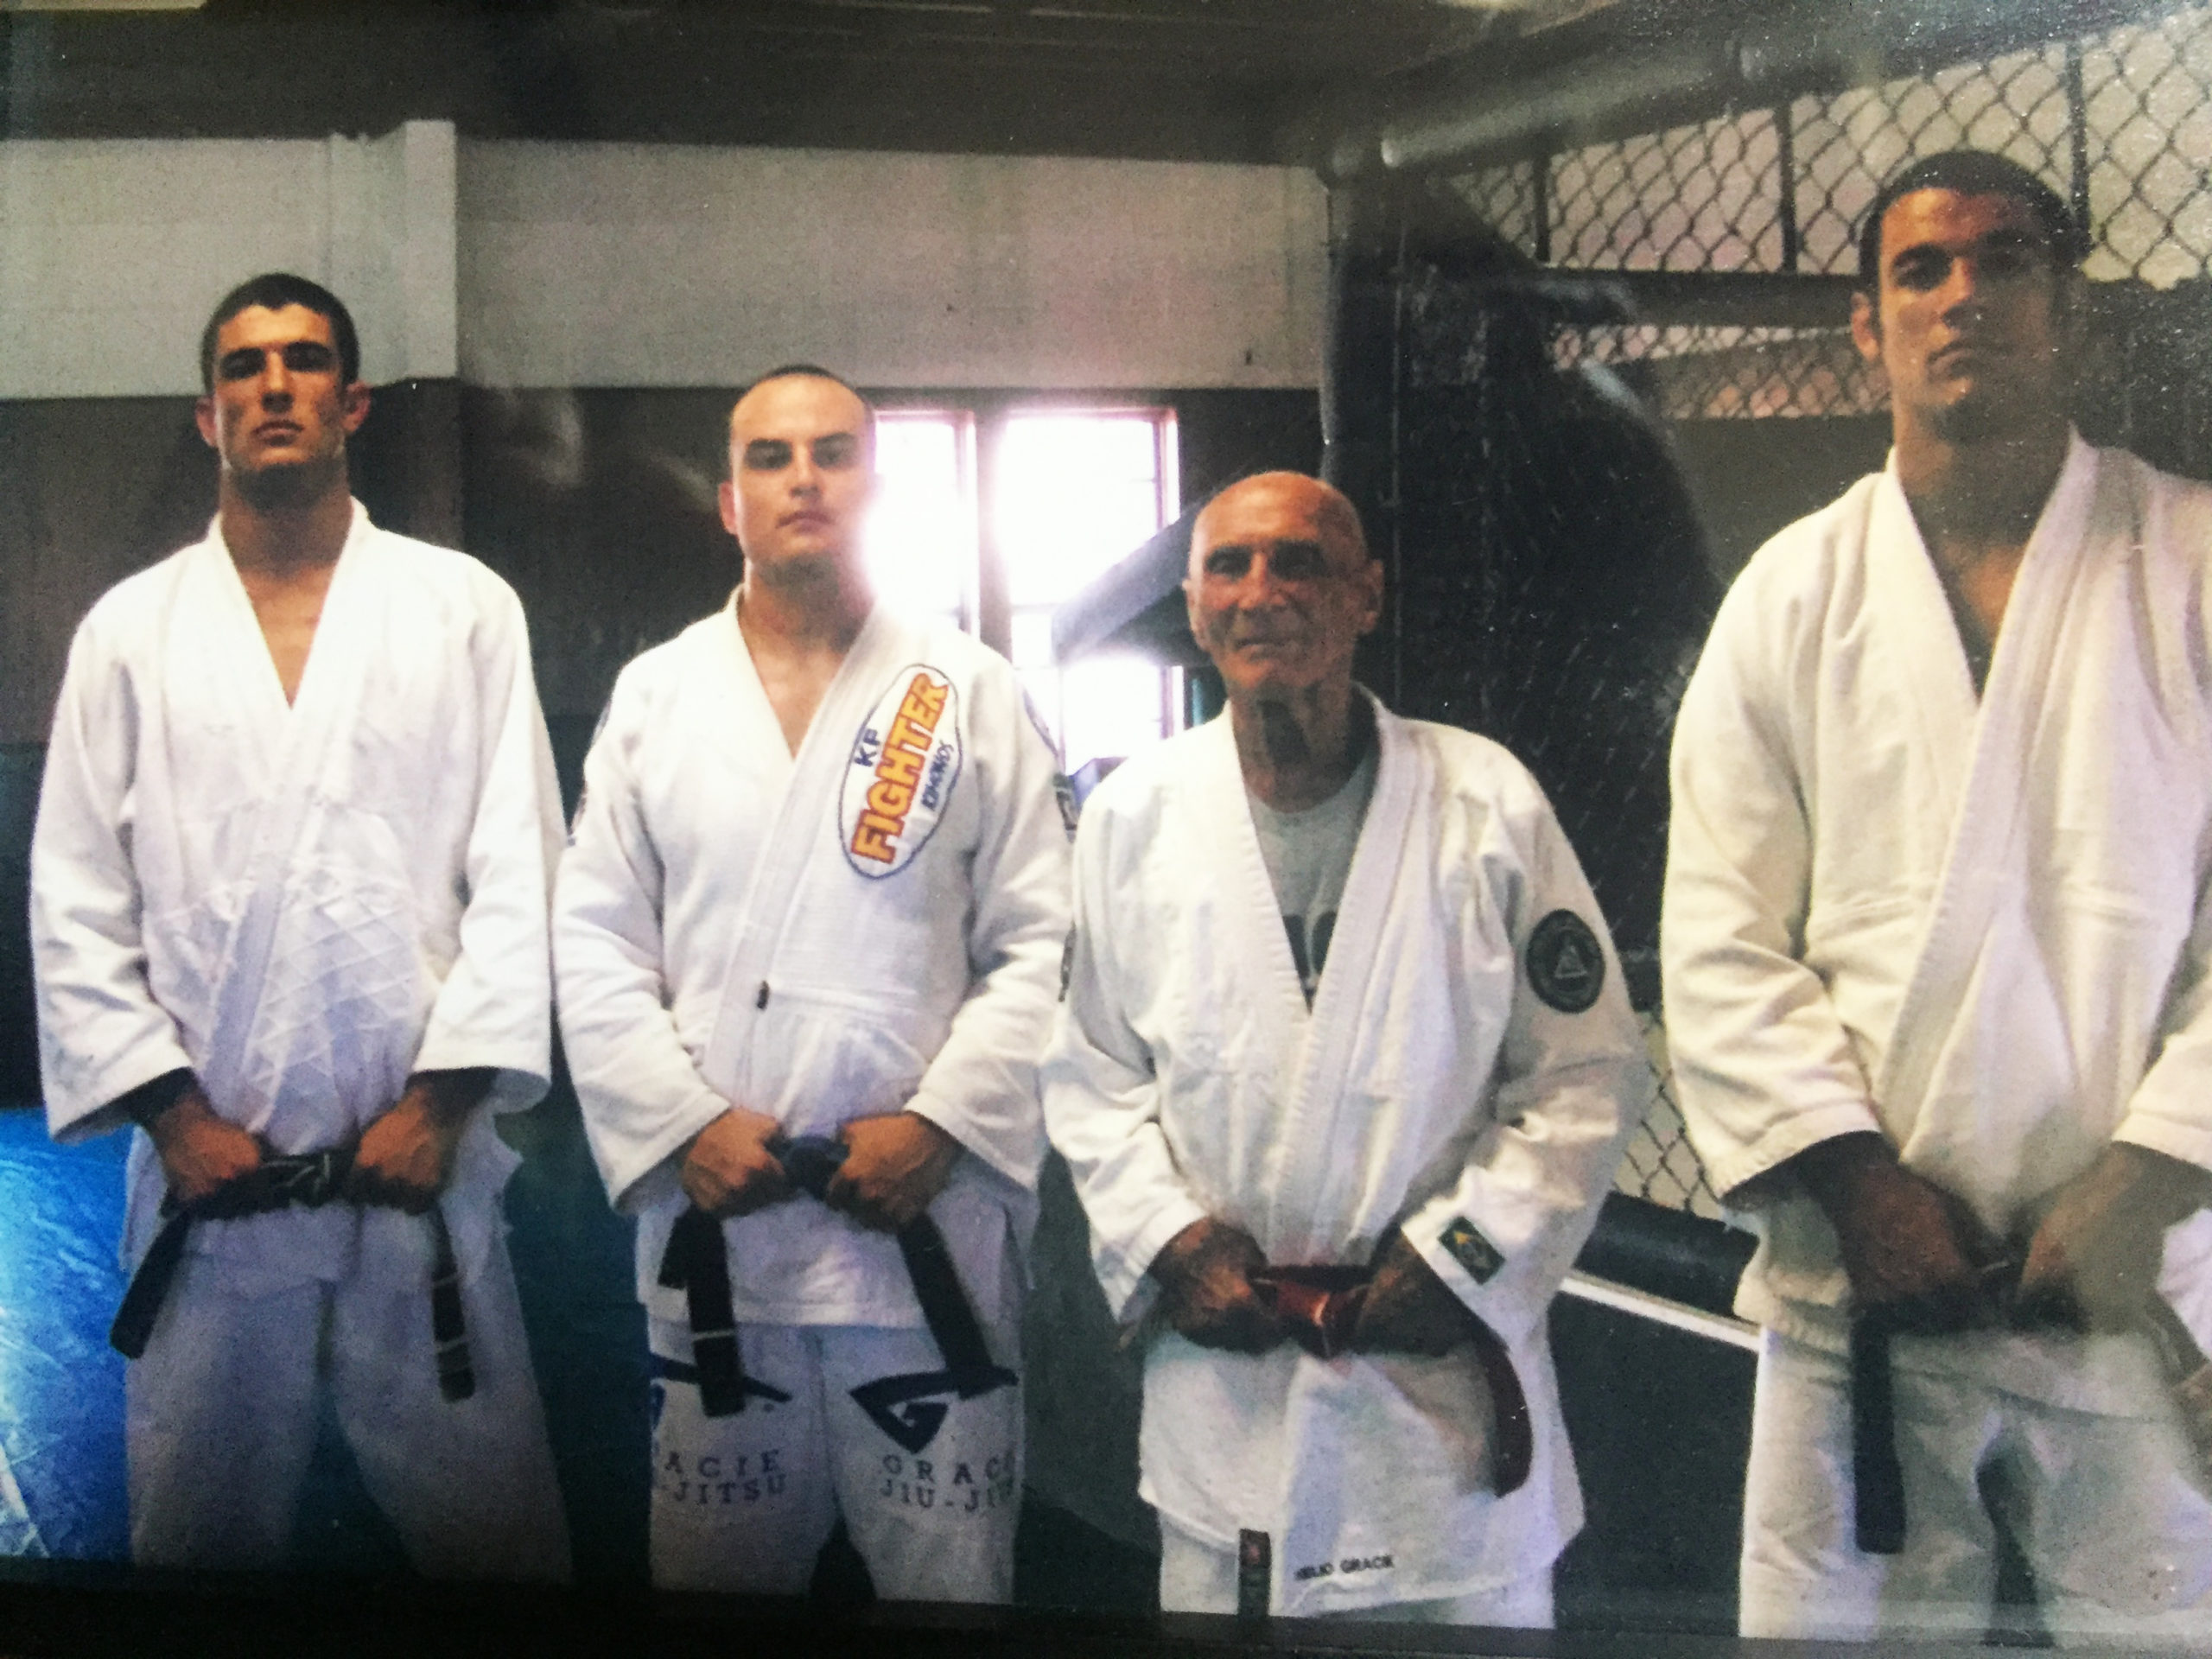 Matt Altschul (center) with Rener (left), Grandmaster Helio (right), and Ryron Gracie 